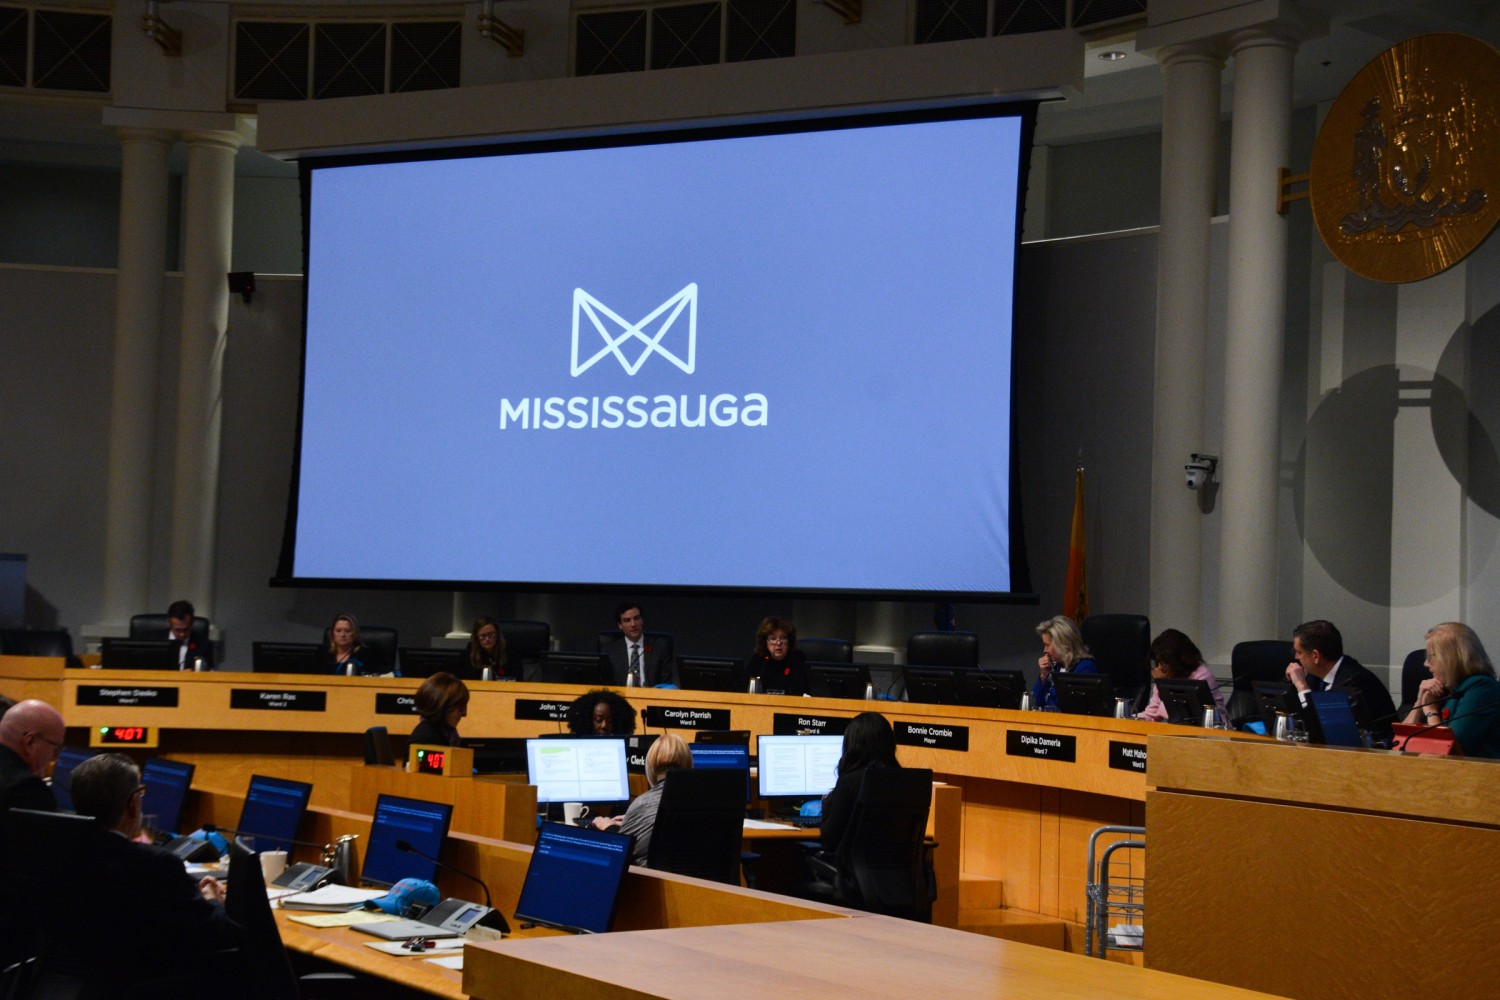 Mississauga Council amends code of conduct following harassment allegations made by former member; investigation launched